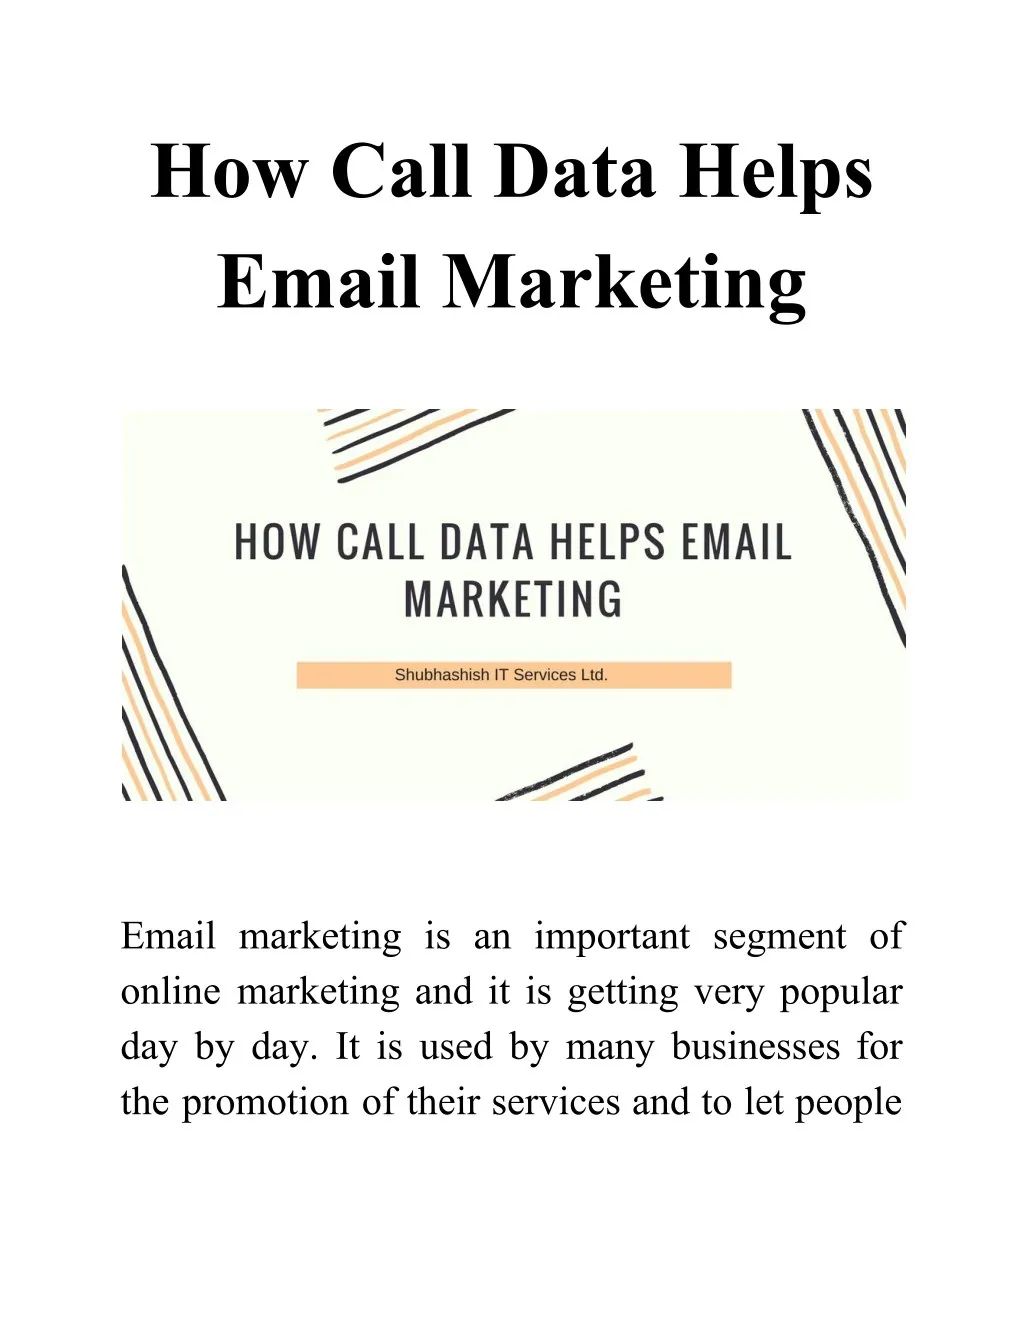 how call data helps email marketing